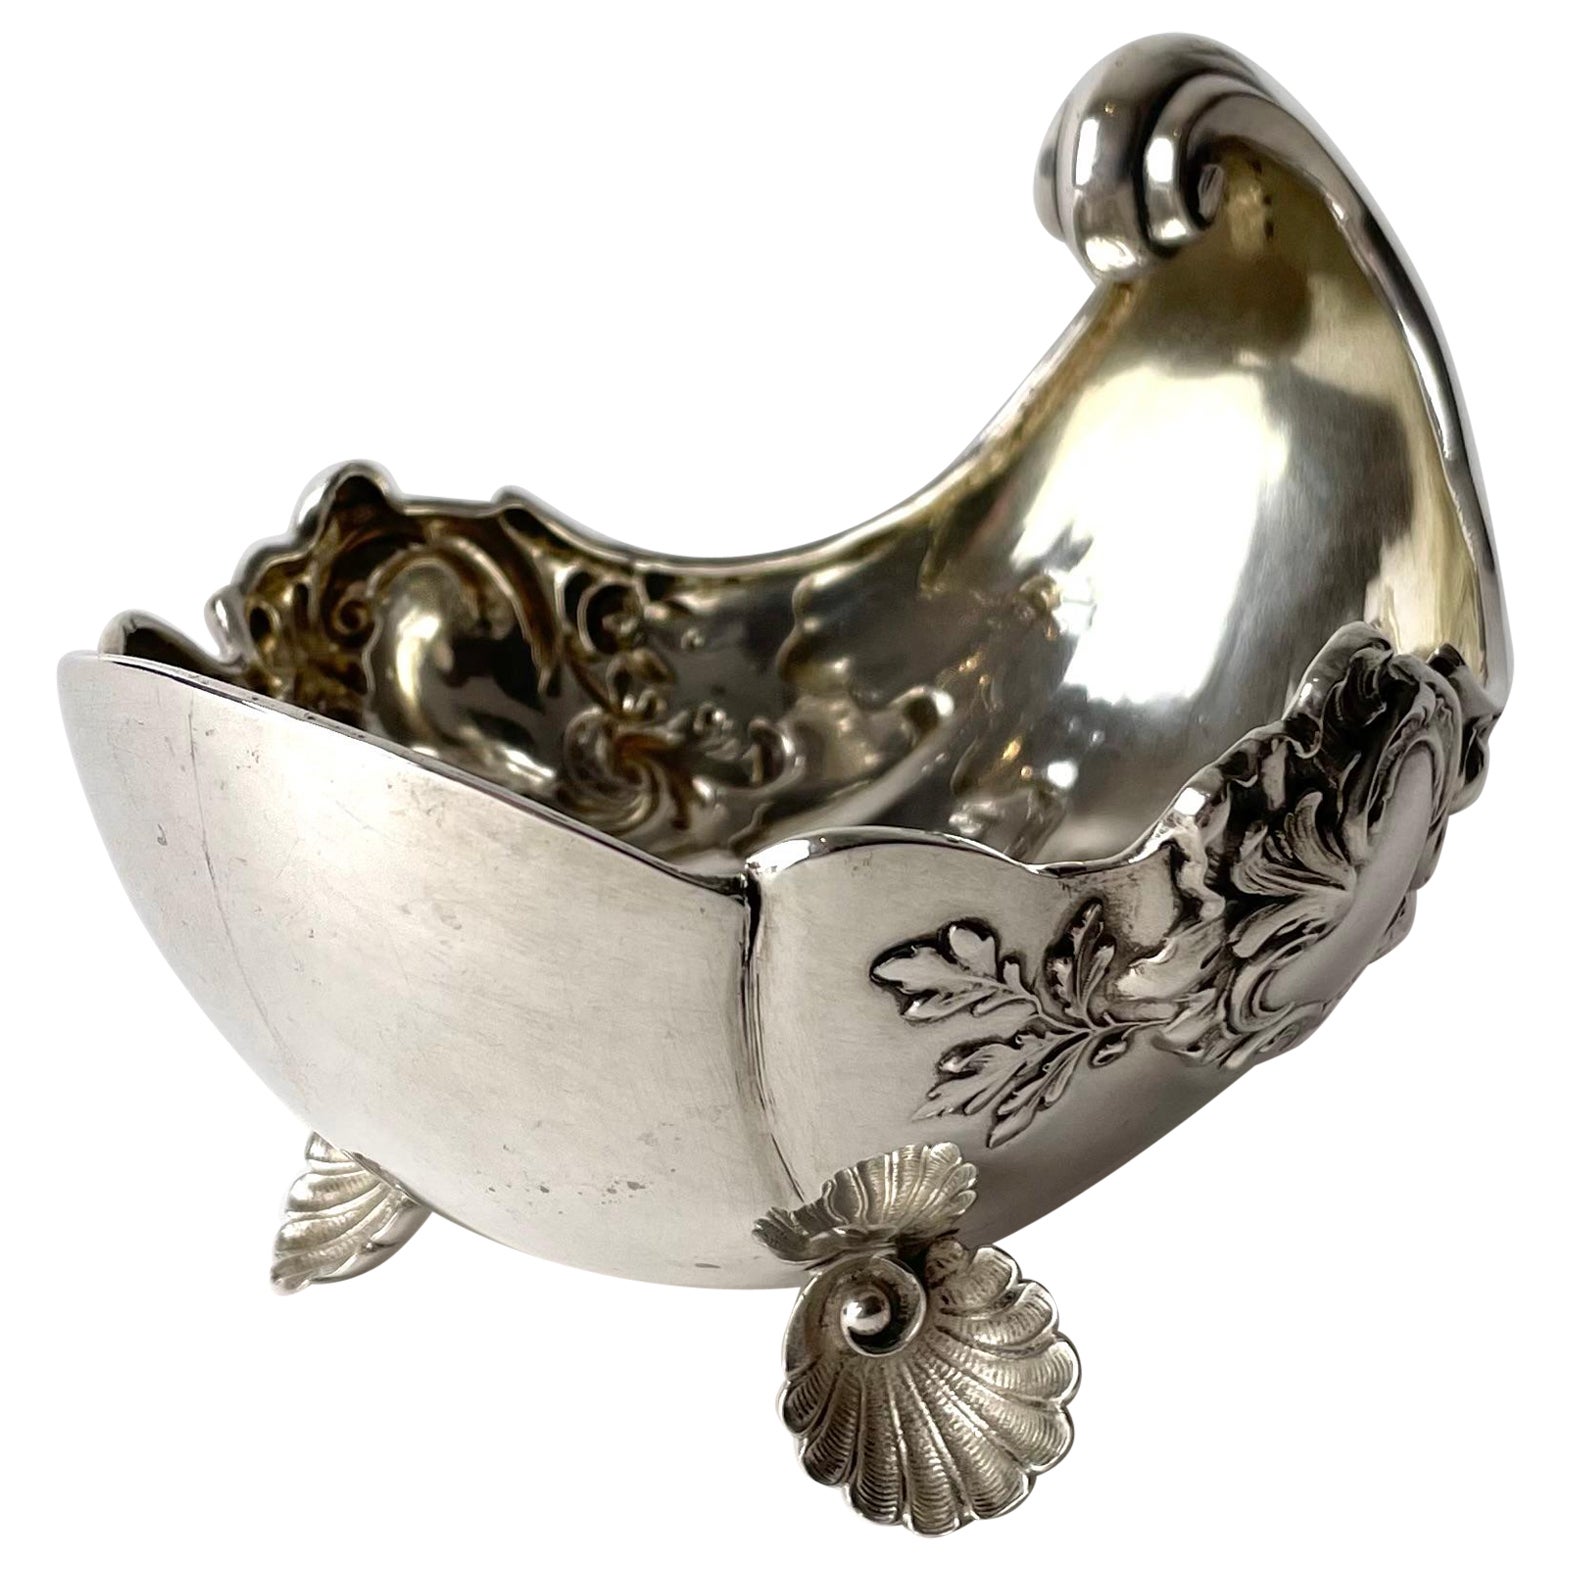 Beautiful Candy Bowl in Silver in the shape of a seashell from Mid 19th Century